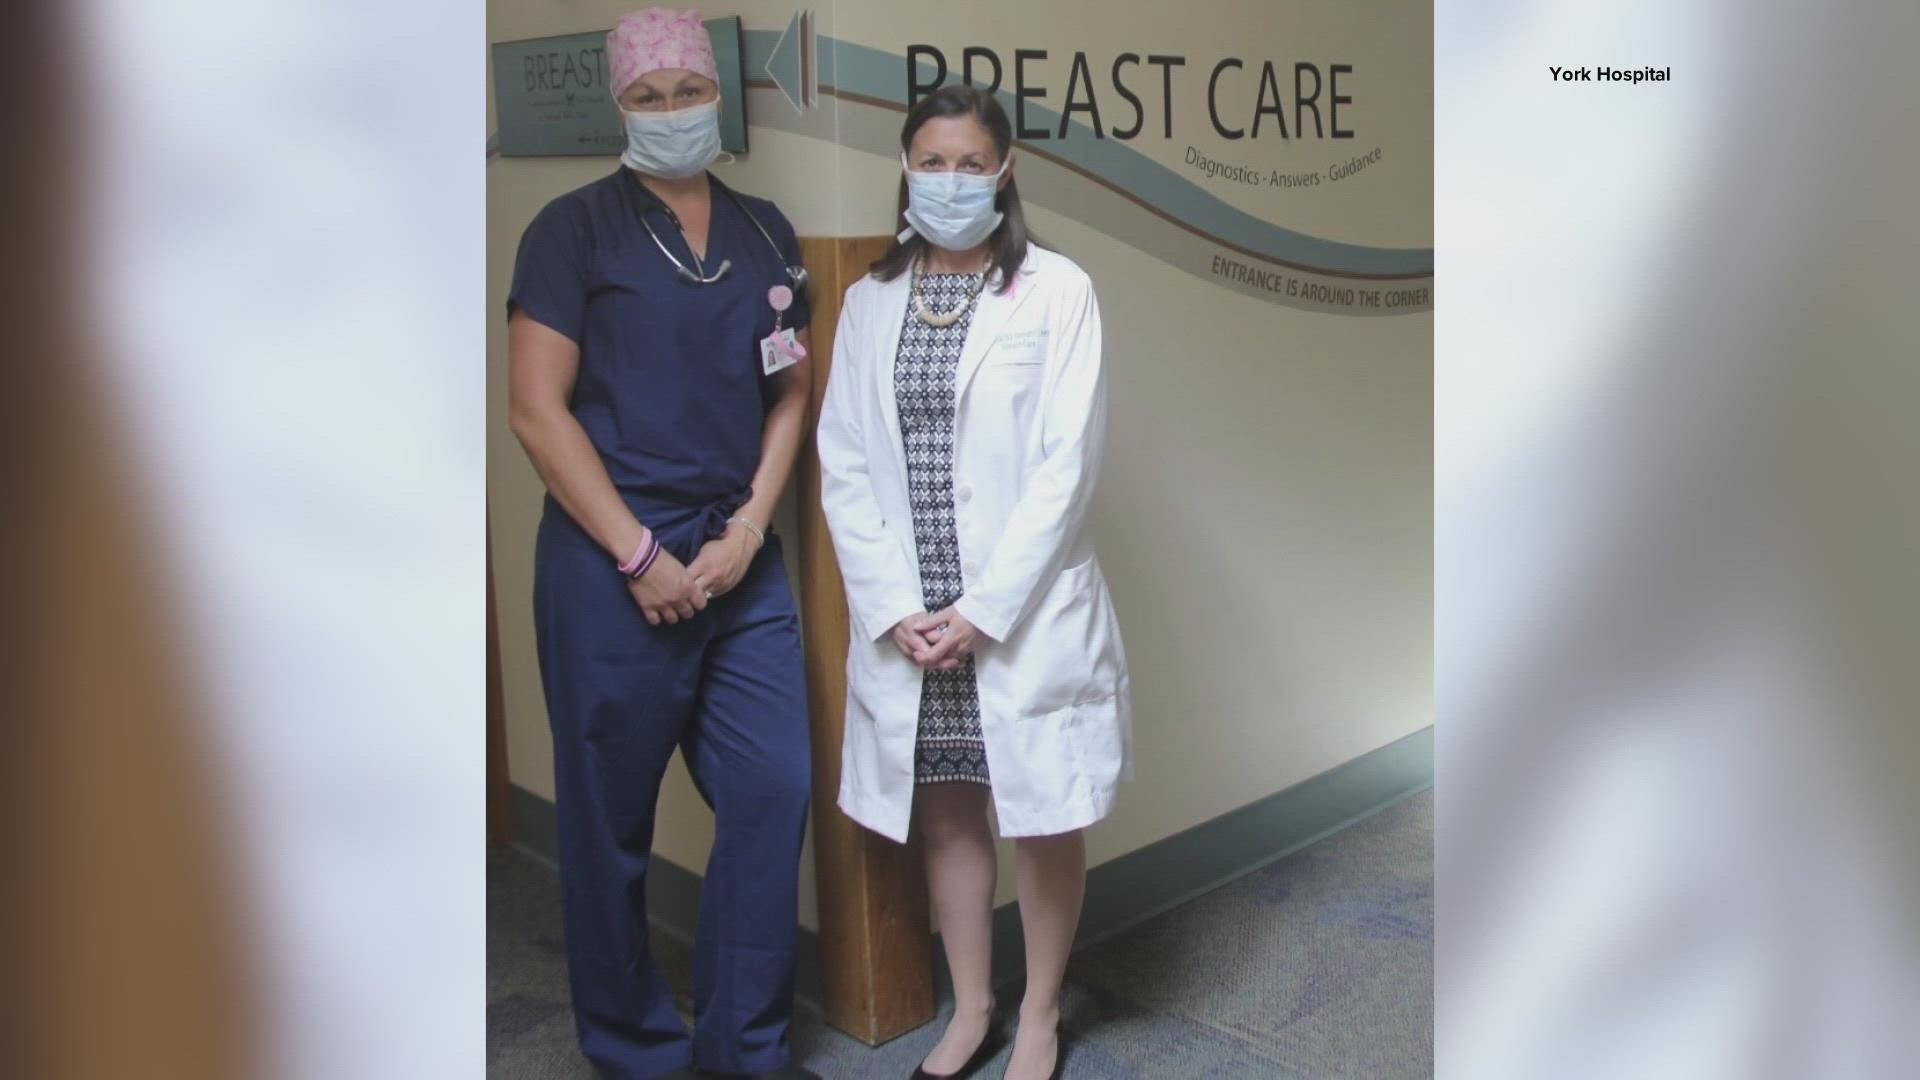 York Hospital's Dr. Janel Nielsen never thought her co-worker and friend, Dr. Amanda Lewis, would become her doctor. Then Nielsen was diagnosed with breast cancer.